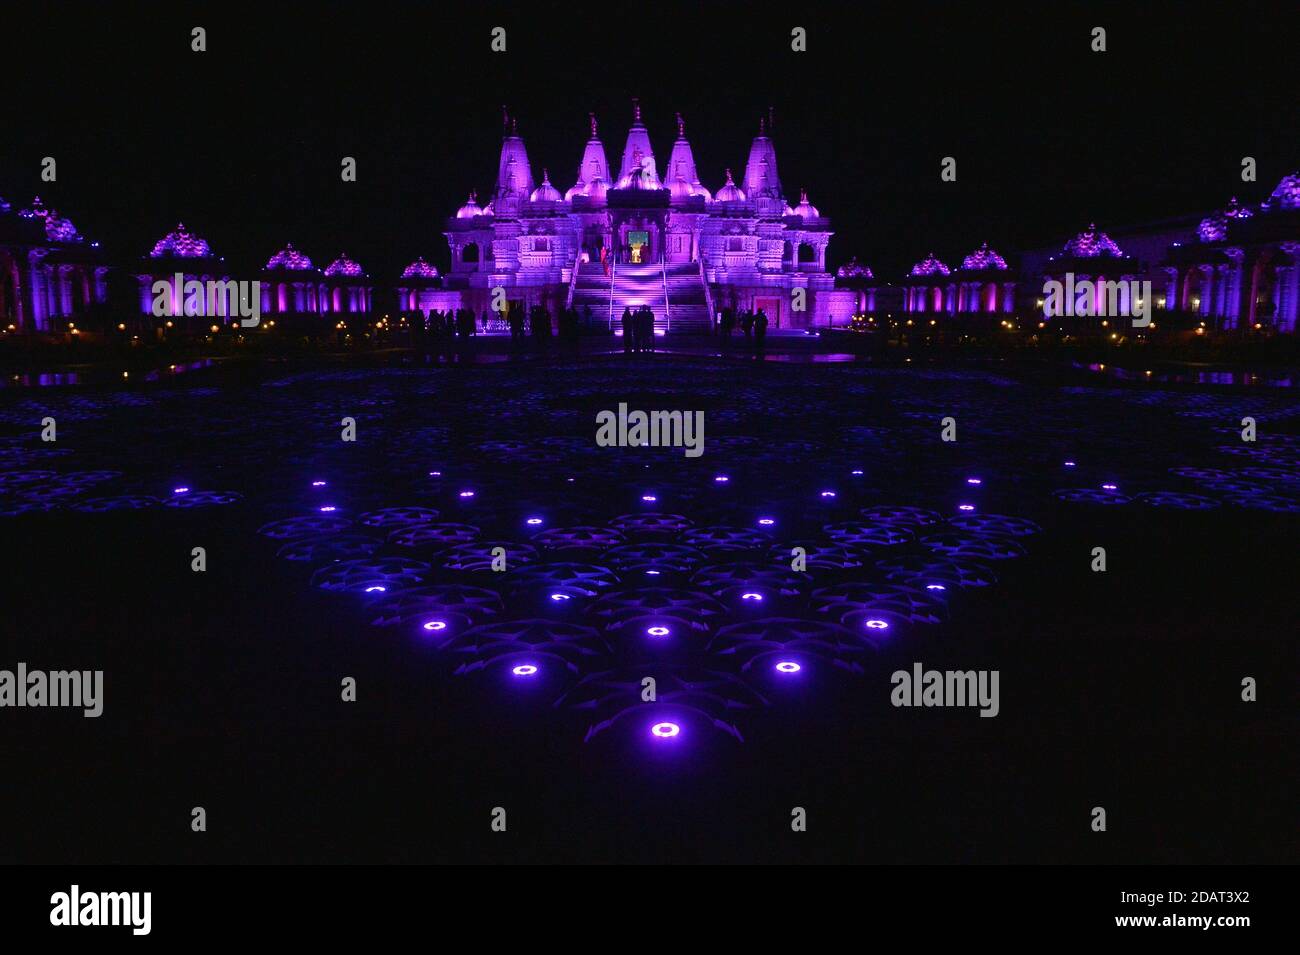 Chino Hills, United States. 15th Nov, 2020. The BAPS Swaminarayan Mandir, a large Hindu Temple is illuminated to mark Diwali, the festival of lights celebrated by a billion people worldwide in Chino Hills, California on Saturday, November 14, 2020. Diwali, the Indian festival of light celebrates the defeat of ignorance through knowledge. Vice president-elect Kamala Harris, set to be the first South Asian American VP tweeted out wishes for a Happy Diwali. Photo by Jim Ruymen/UPI Credit: UPI/Alamy Live News Stock Photo